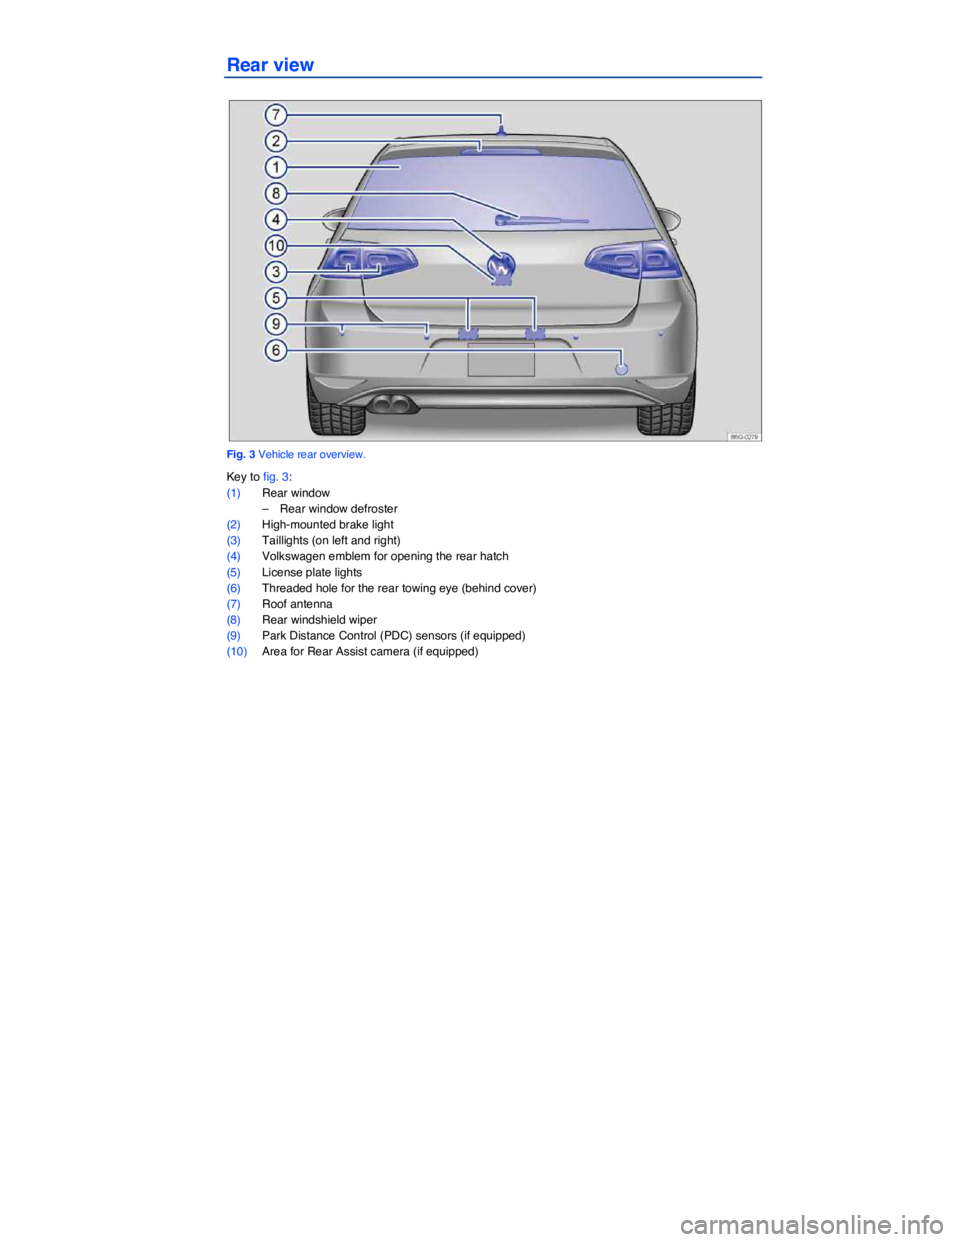 VOLKSWAGEN GOLF PLUS 2015  Owner´s Manual   
Rear view 
 
Fig. 3 Vehicle rear overview. 
Key to fig. 3: 
(1) Rear window 
–  Rear window defroster  
(2) High-mounted brake light  
(3) Taillights (on left and right)  
(4) Volkswagen emblem f